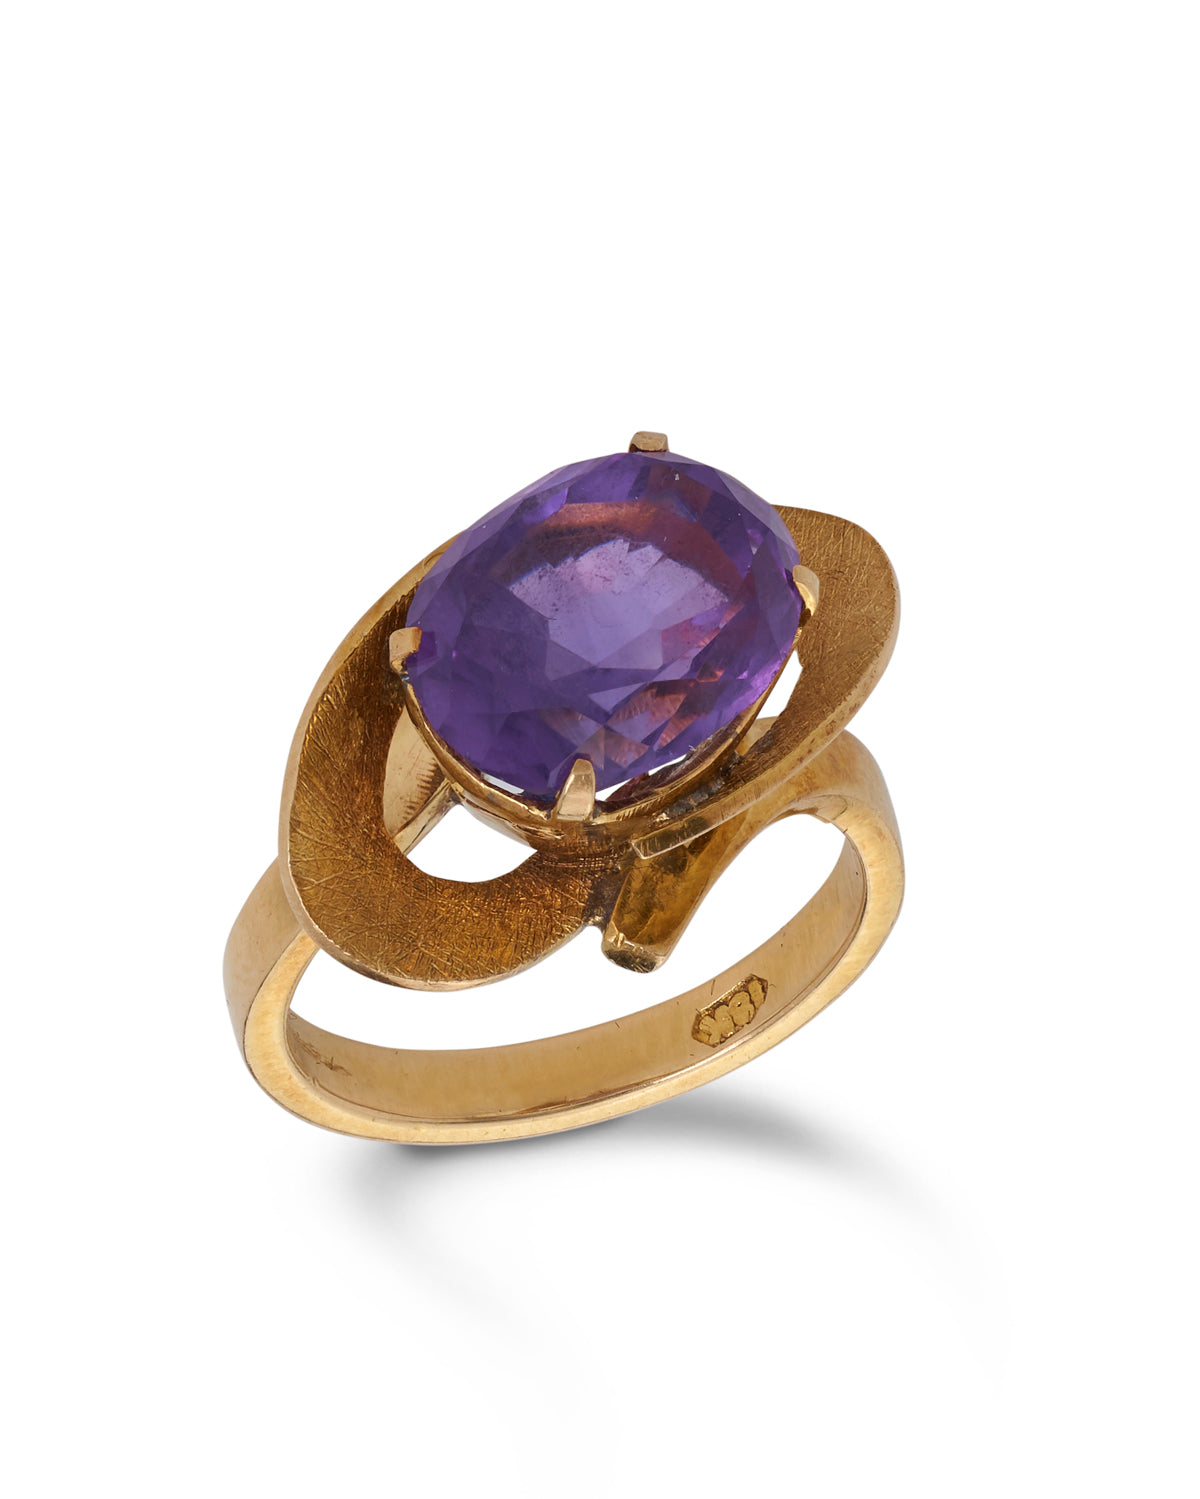 Vintage gold & amethyst cocktail ring, circa 1960's. 